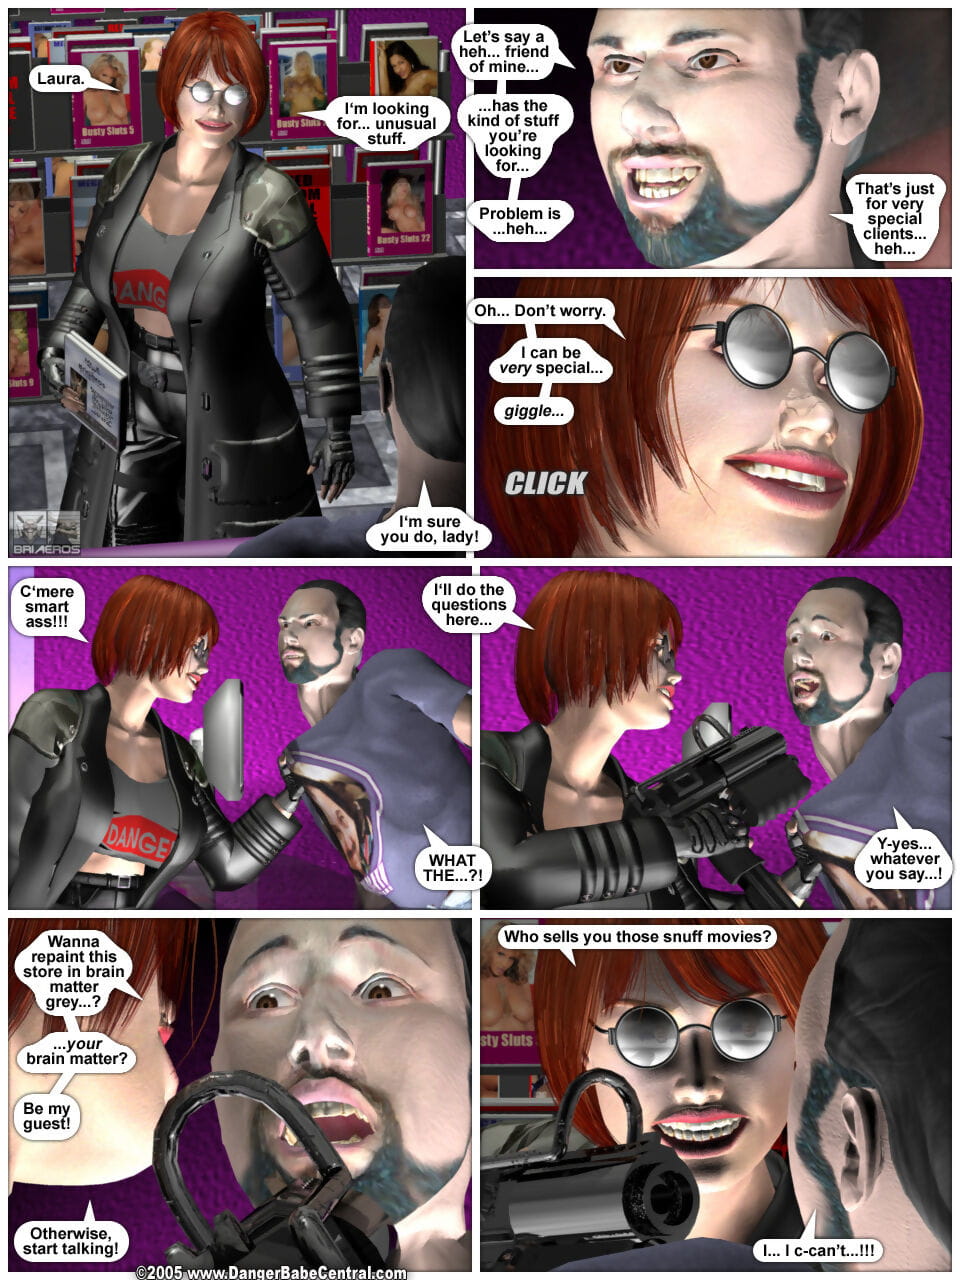 Ballad of Laura Talbot 3d page 1